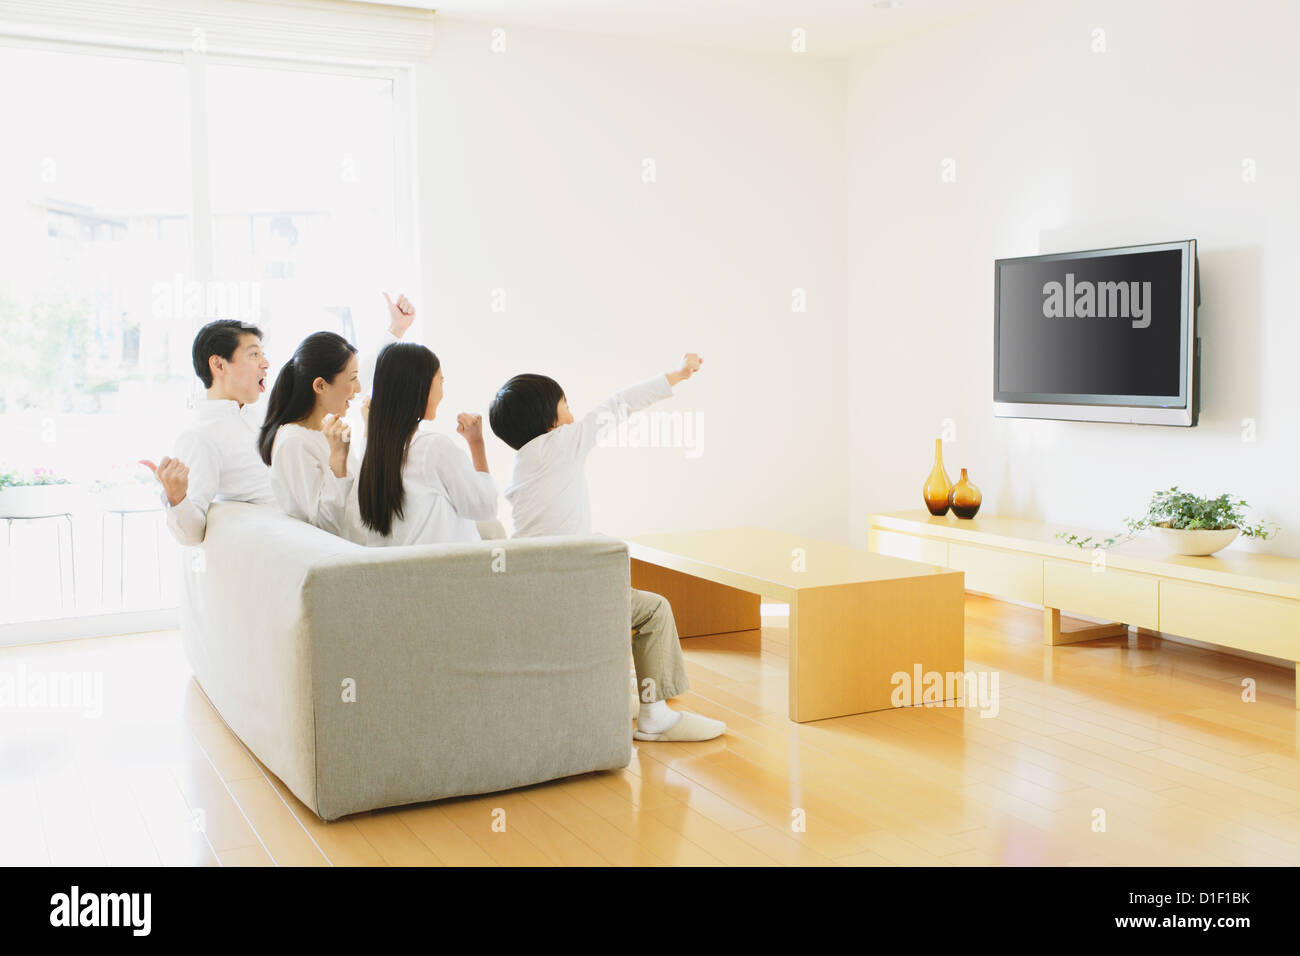 Family of four people watching TV on the sofa in the living room Stock Photo